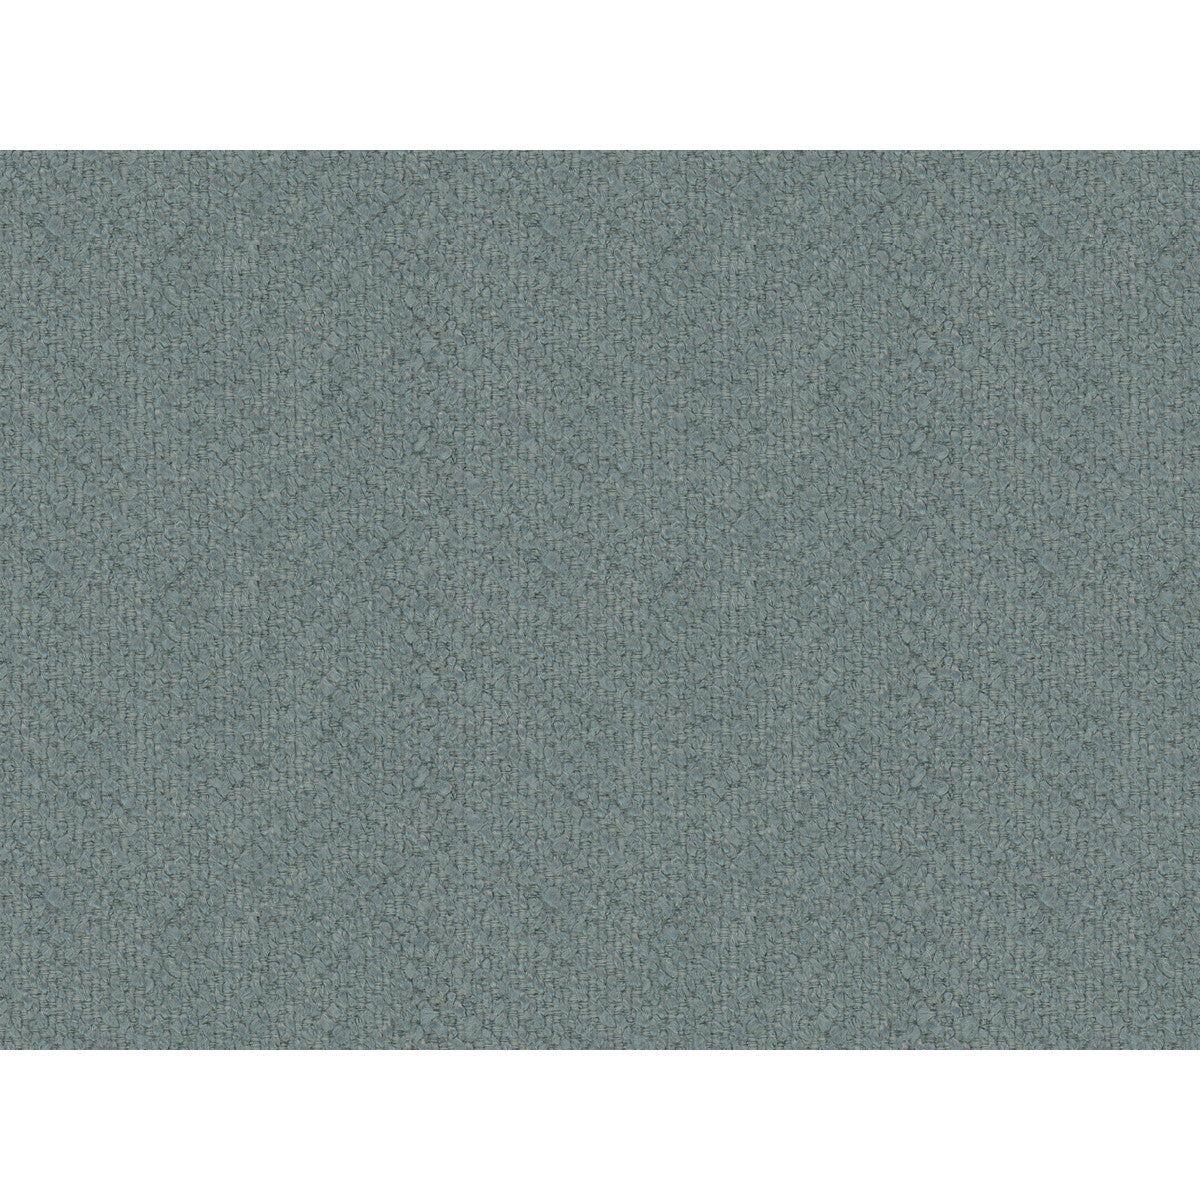 Kravet Smart fabric in 34631-15 color - pattern 34631.15.0 - by Kravet Smart in the Performance Crypton Home collection